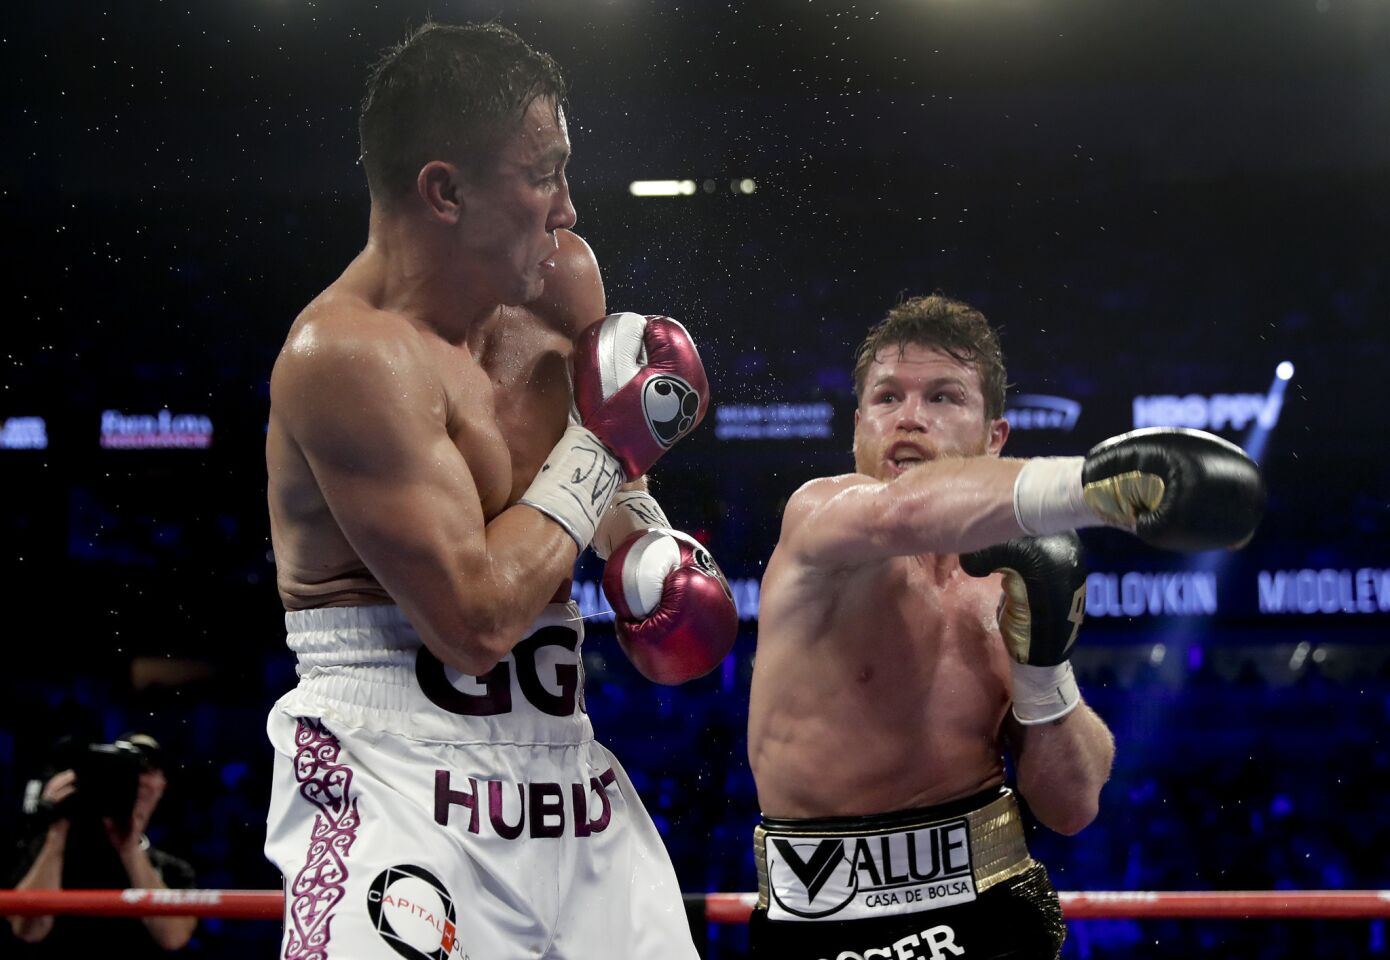 Gennady Golovkin, left, and Canelo Alvarez trade punches in the fifth round during a middleweight title boxing match, Saturday, Sept. 15, 2018, in Las Vegas.